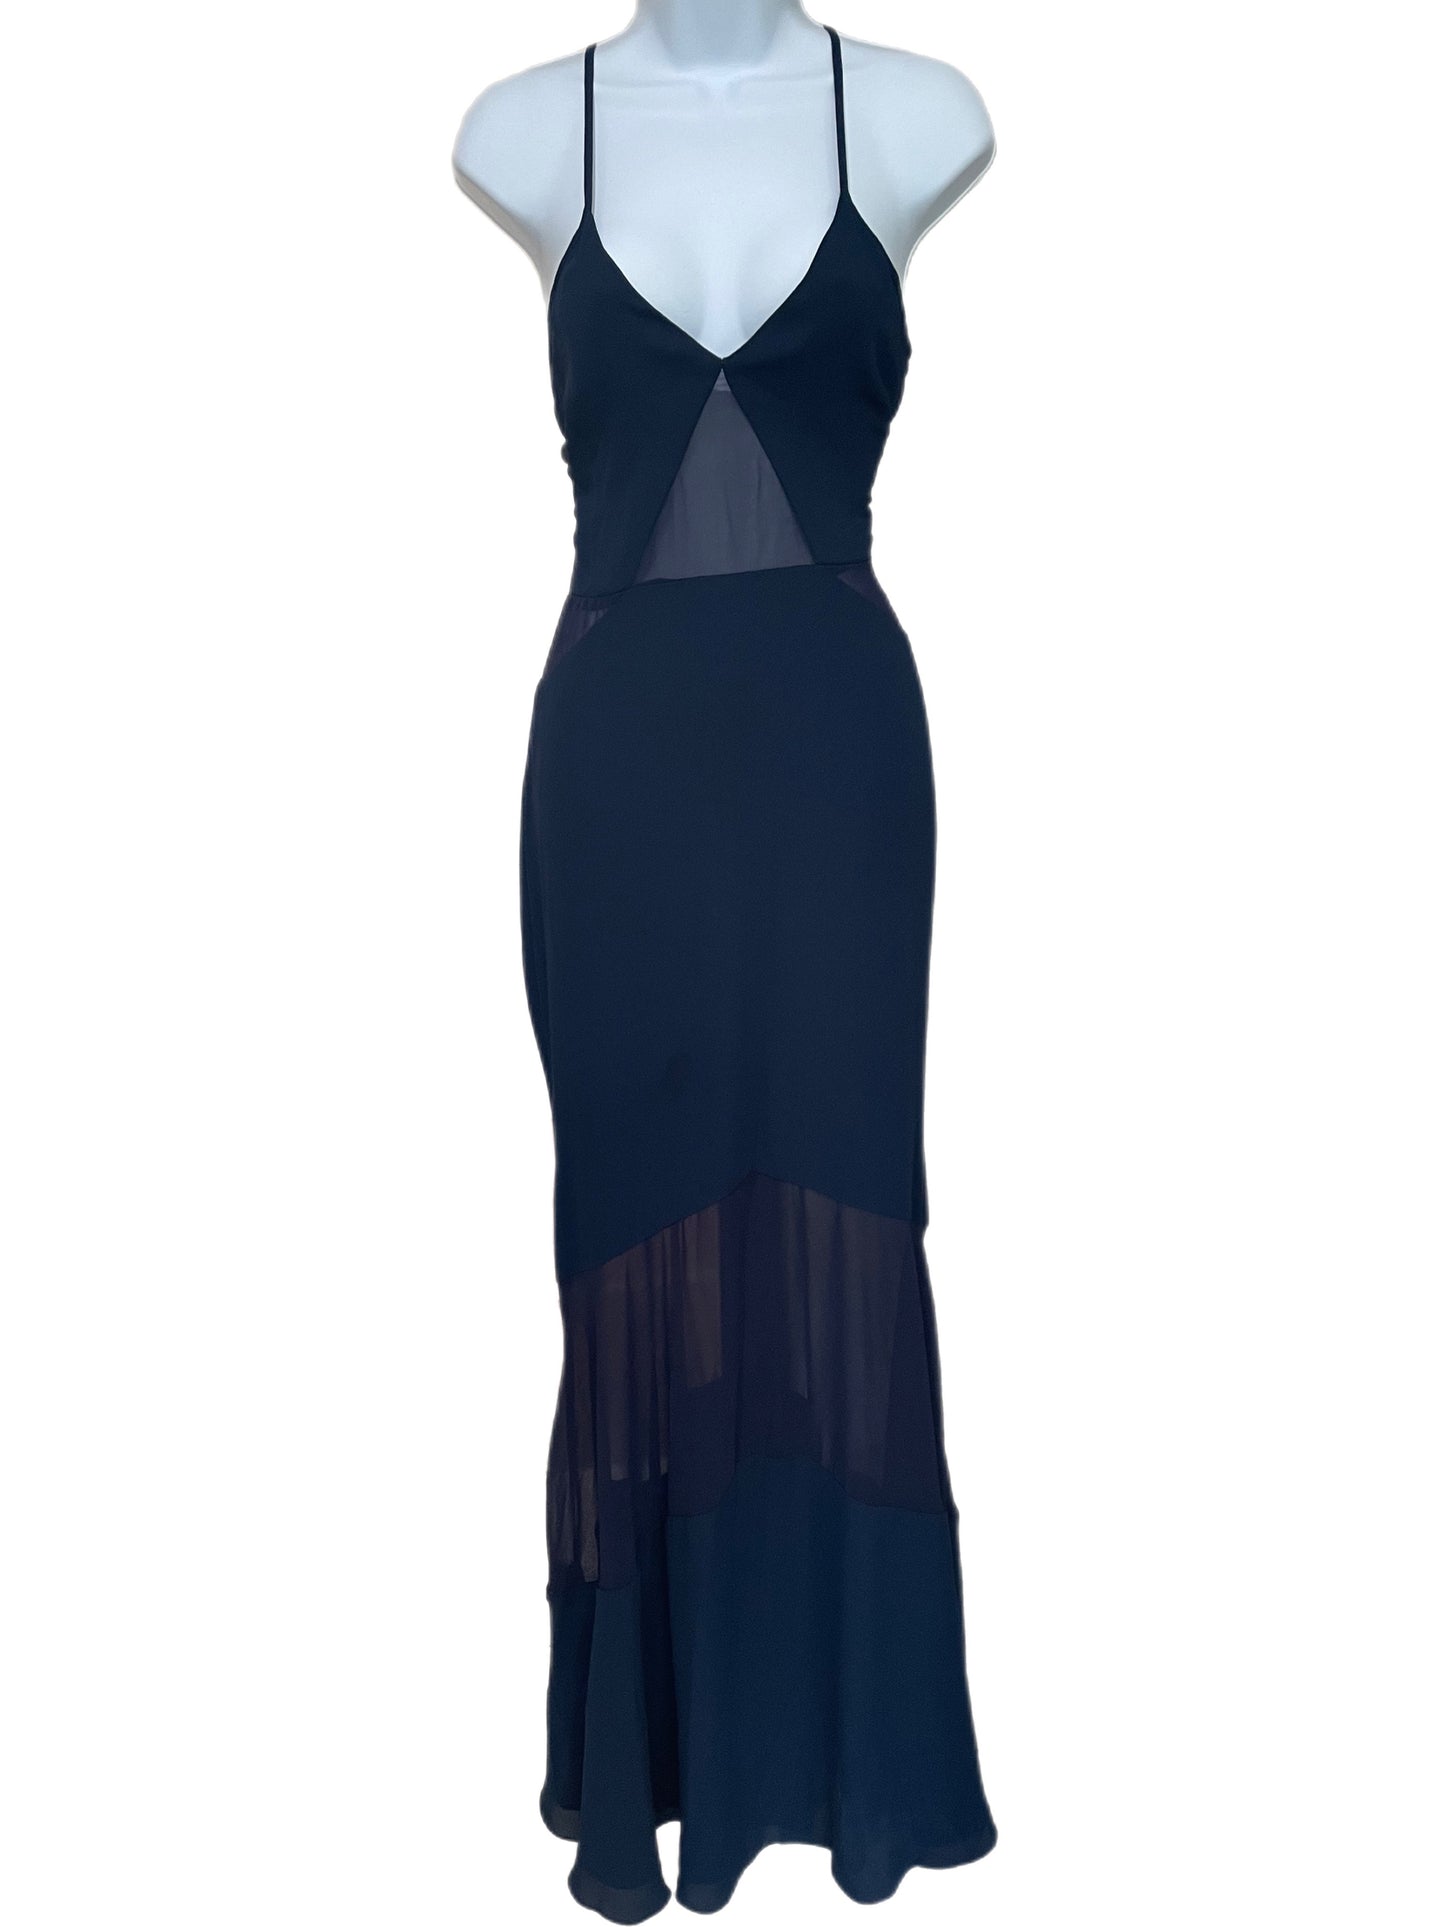 Gown-Deep V Front- Sheer Accented Design-Navy Blue Coloring- By Fame & Partners